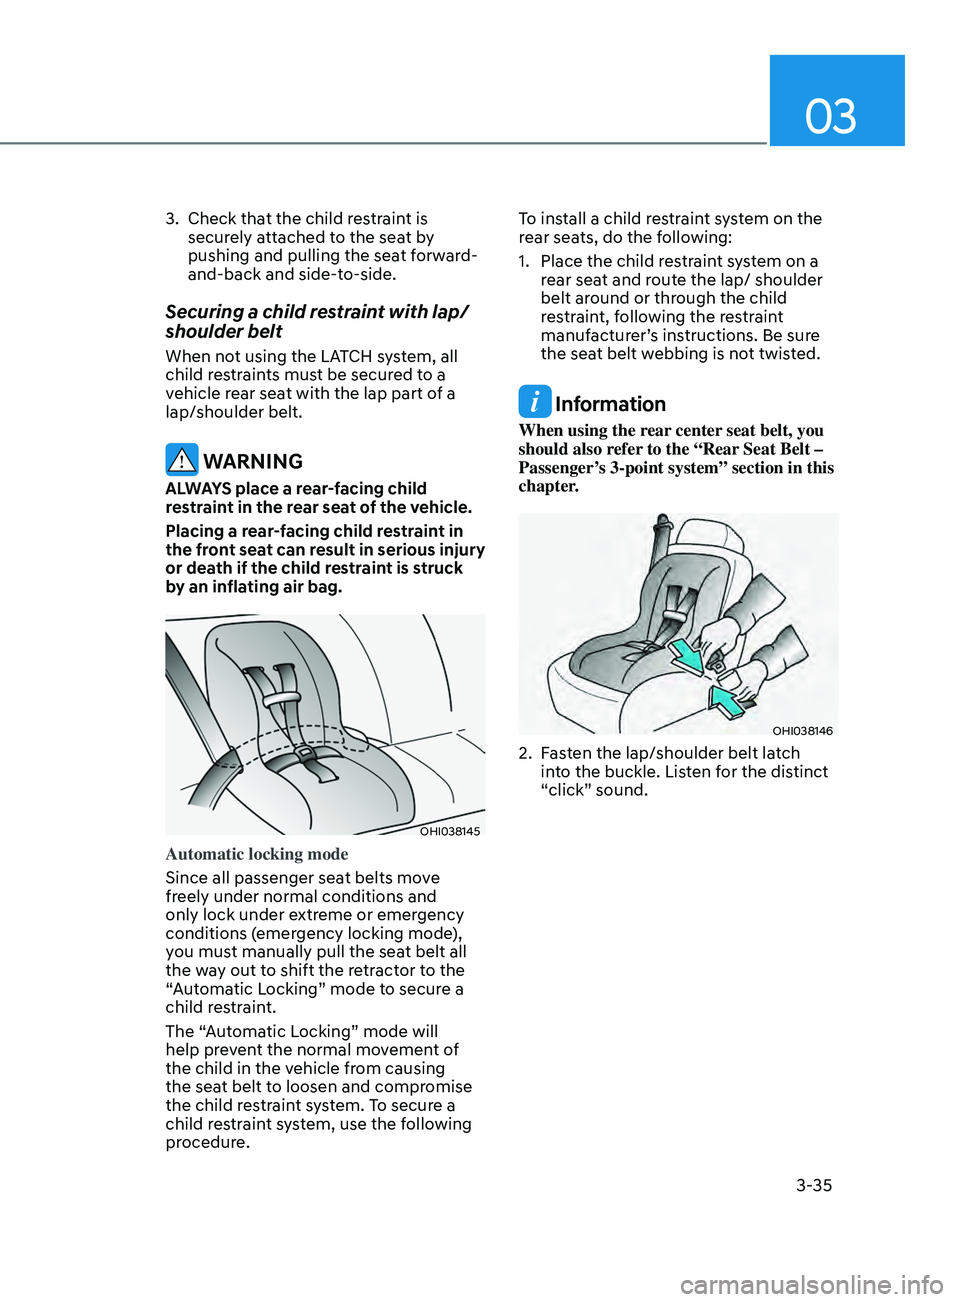 HYUNDAI SONATA 2021  Owners Manual 03
3-35
3. Check that the child restraint is 
securely attached to the seat by 
pushing and pulling the seat forward-
and-back and side-to-side.
Securing a child restraint with lap/
shoulder belt
When